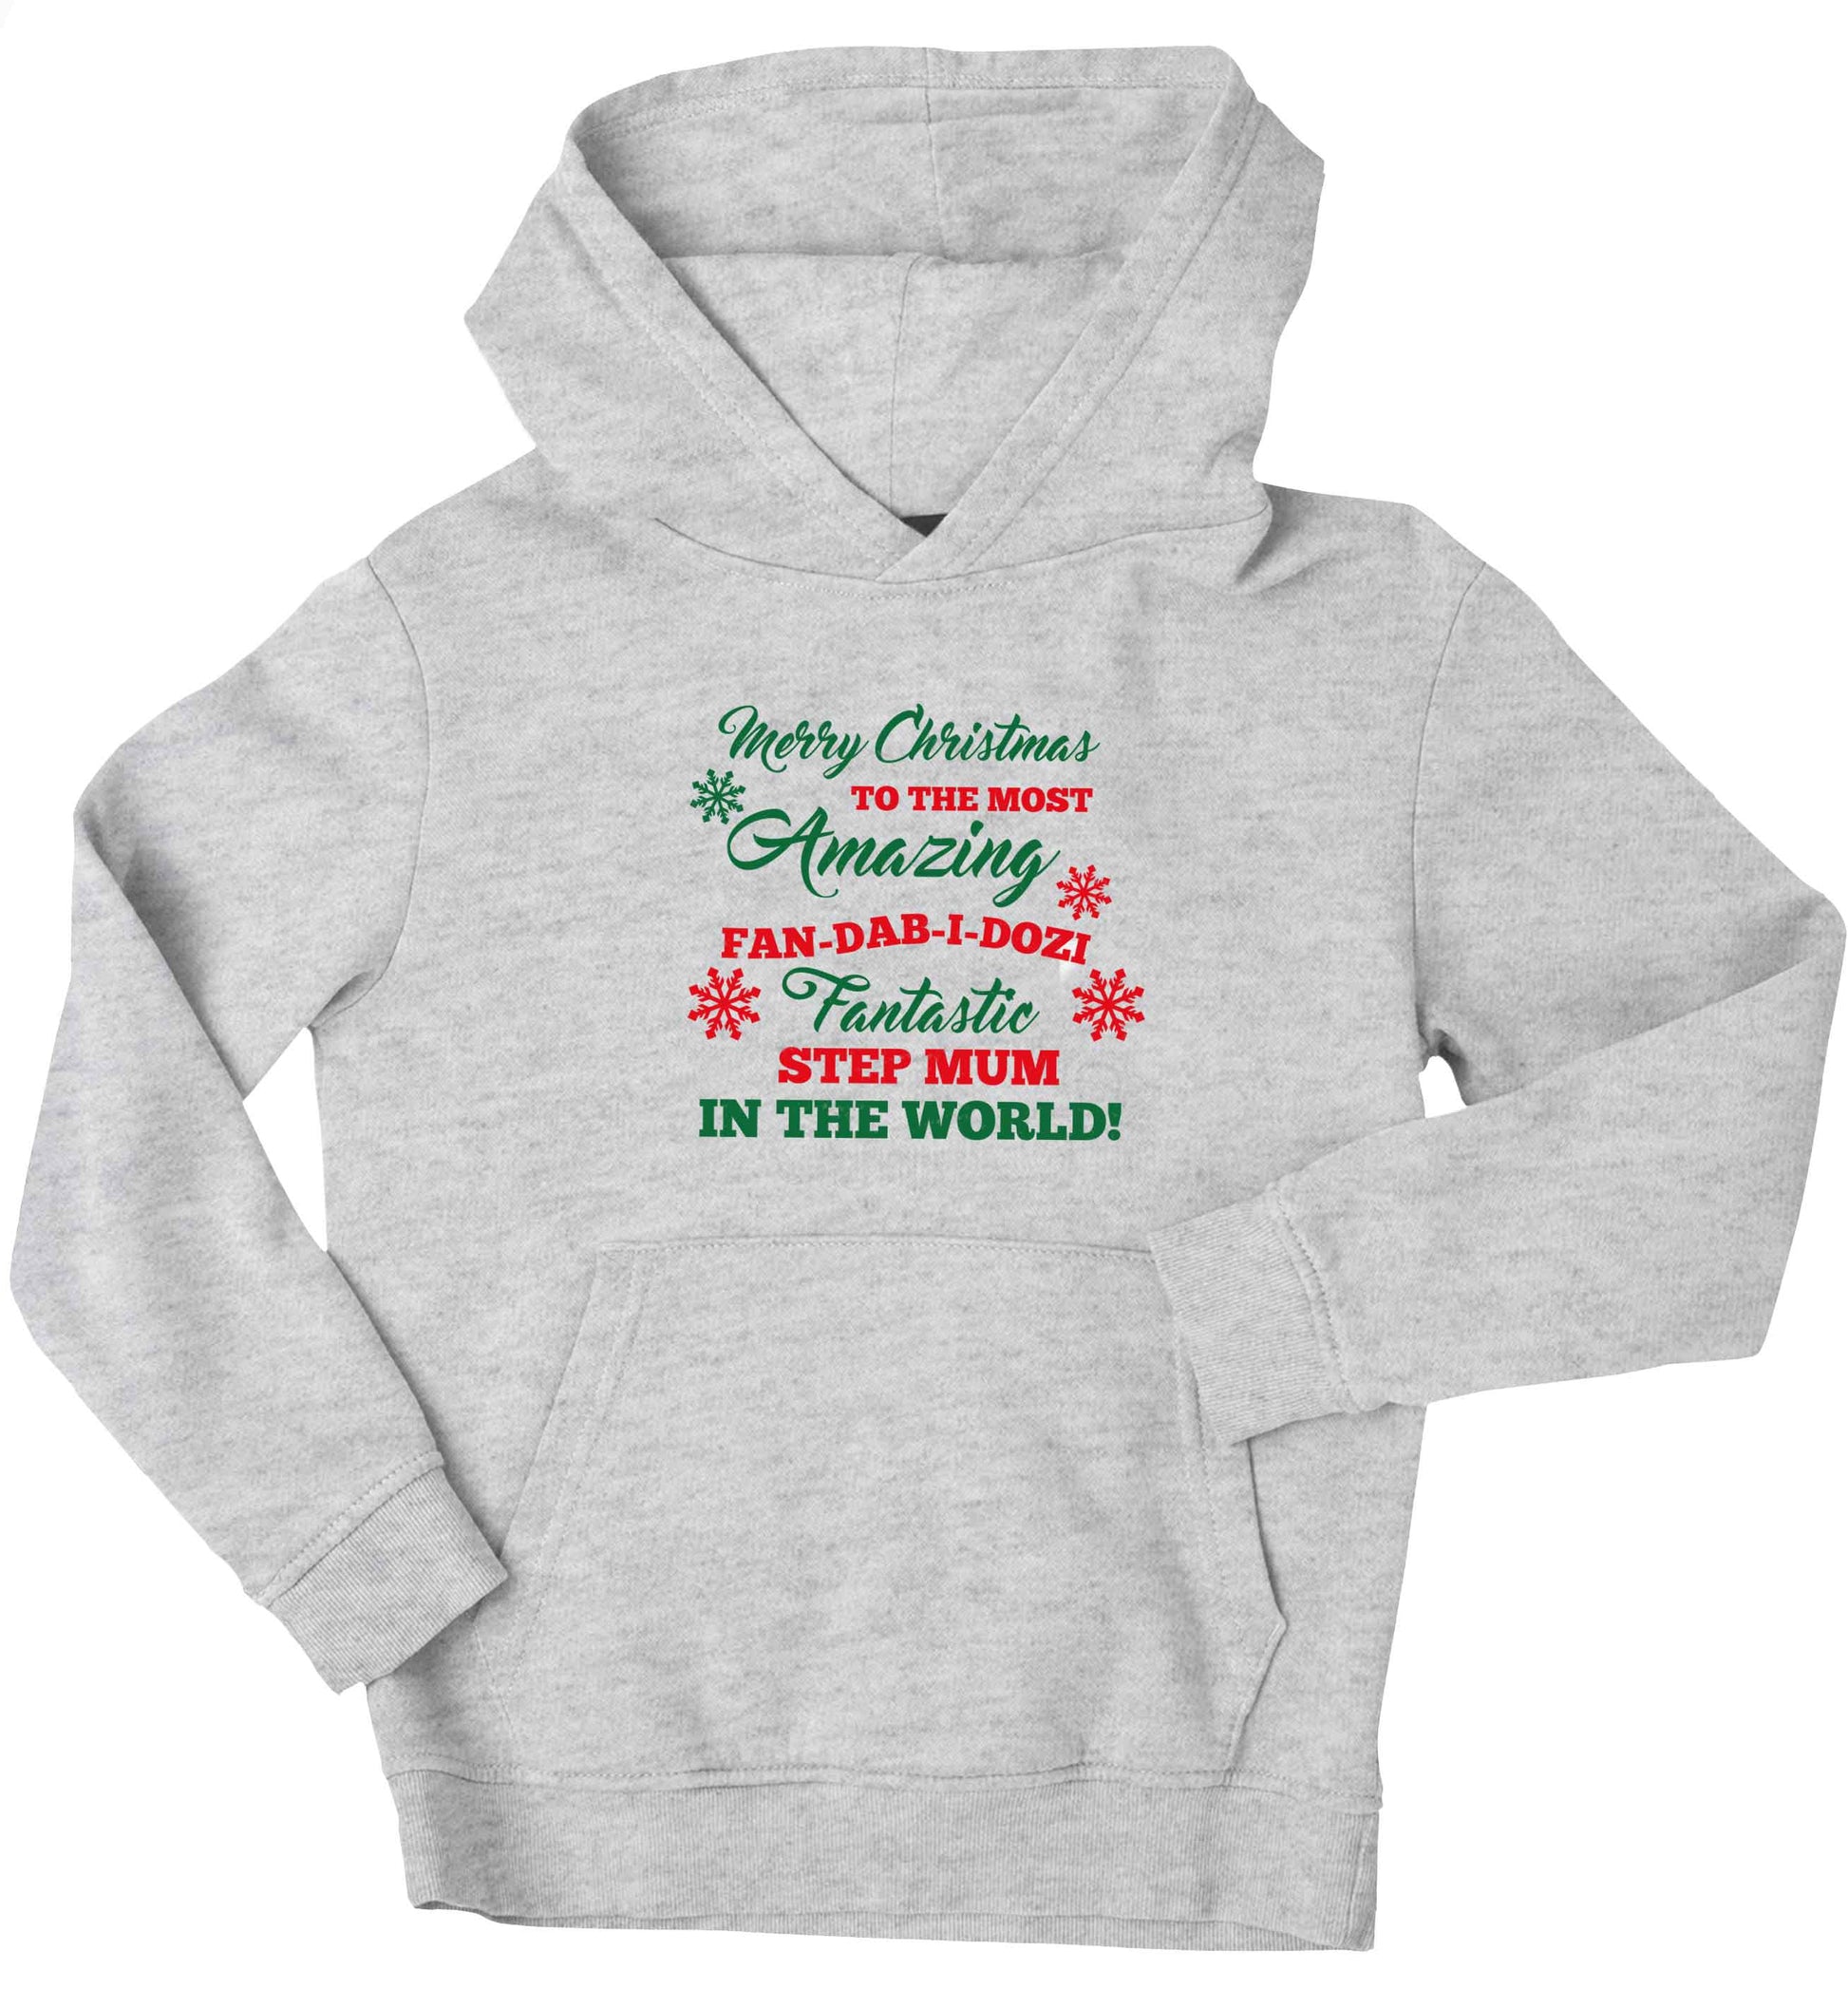 Merry Christmas to the most amazing fan-dab-i-dozi fantasic Step Mum in the world children's grey hoodie 12-13 Years